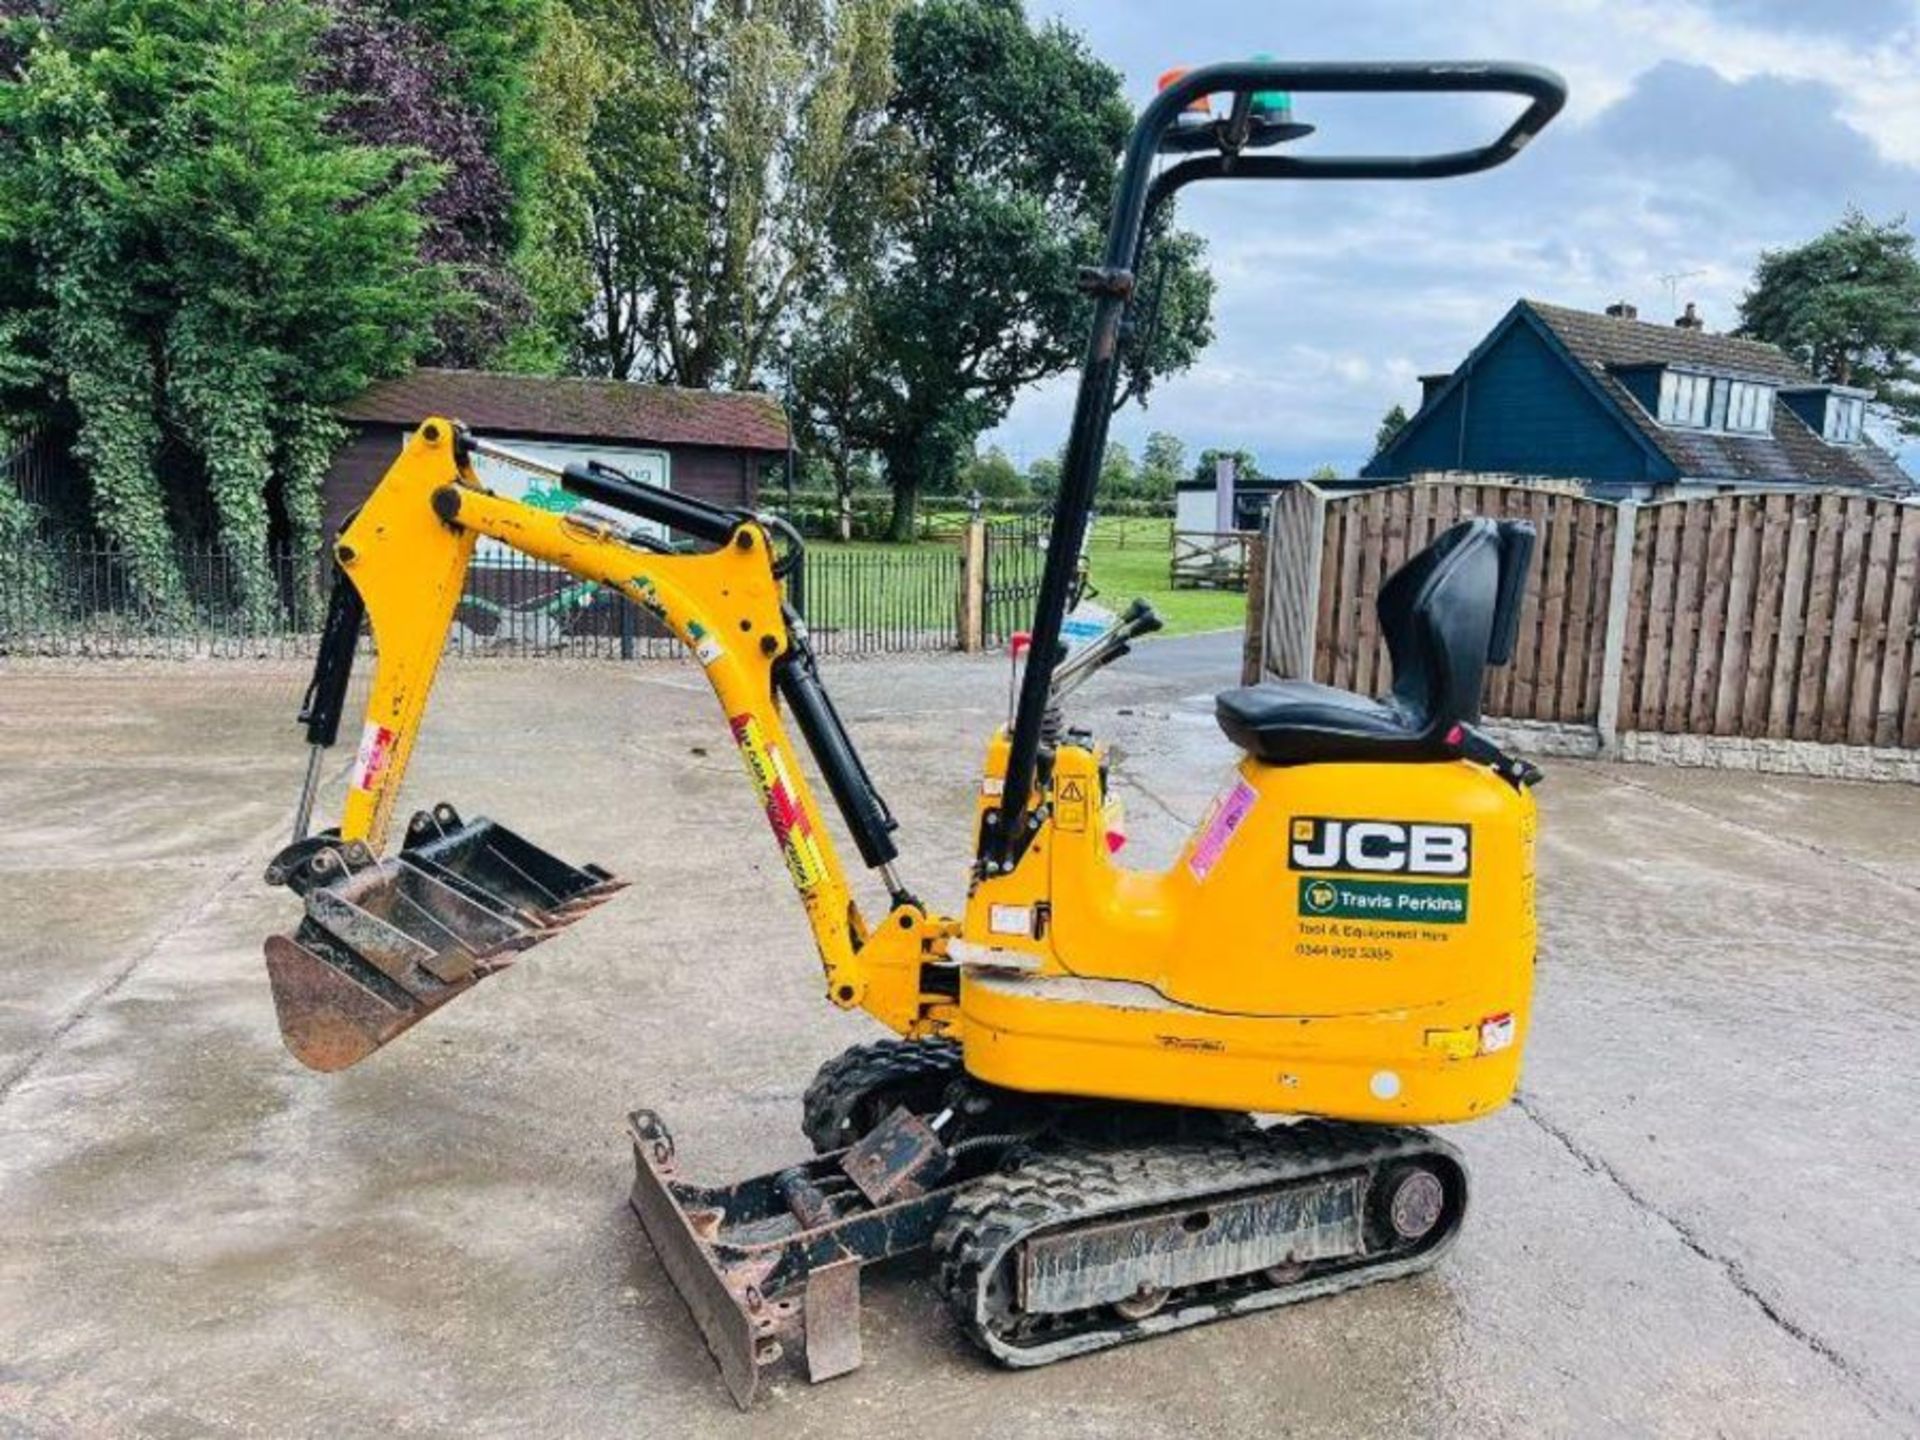 JCB MICRO DIGGER *YEAR 2019, ONLY 338 HOURS* C/W EXPANDING TRACKS - Image 7 of 16